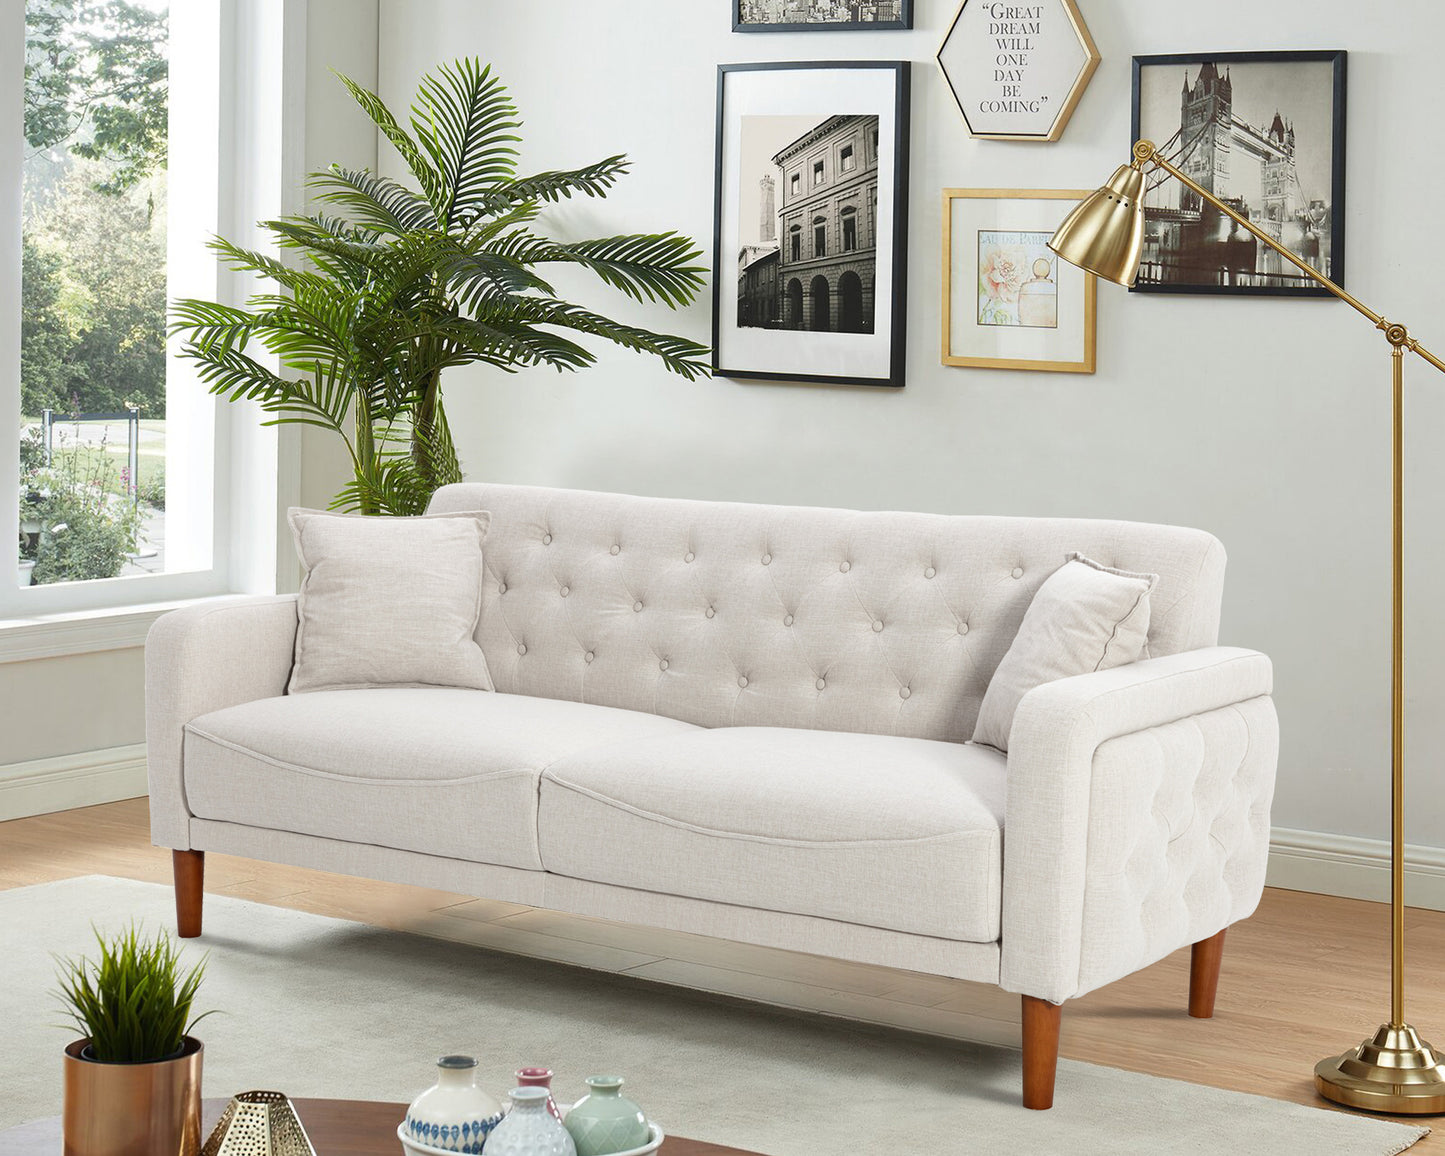 Gray Linen Loveseat with Button Tufting with 2 pillows